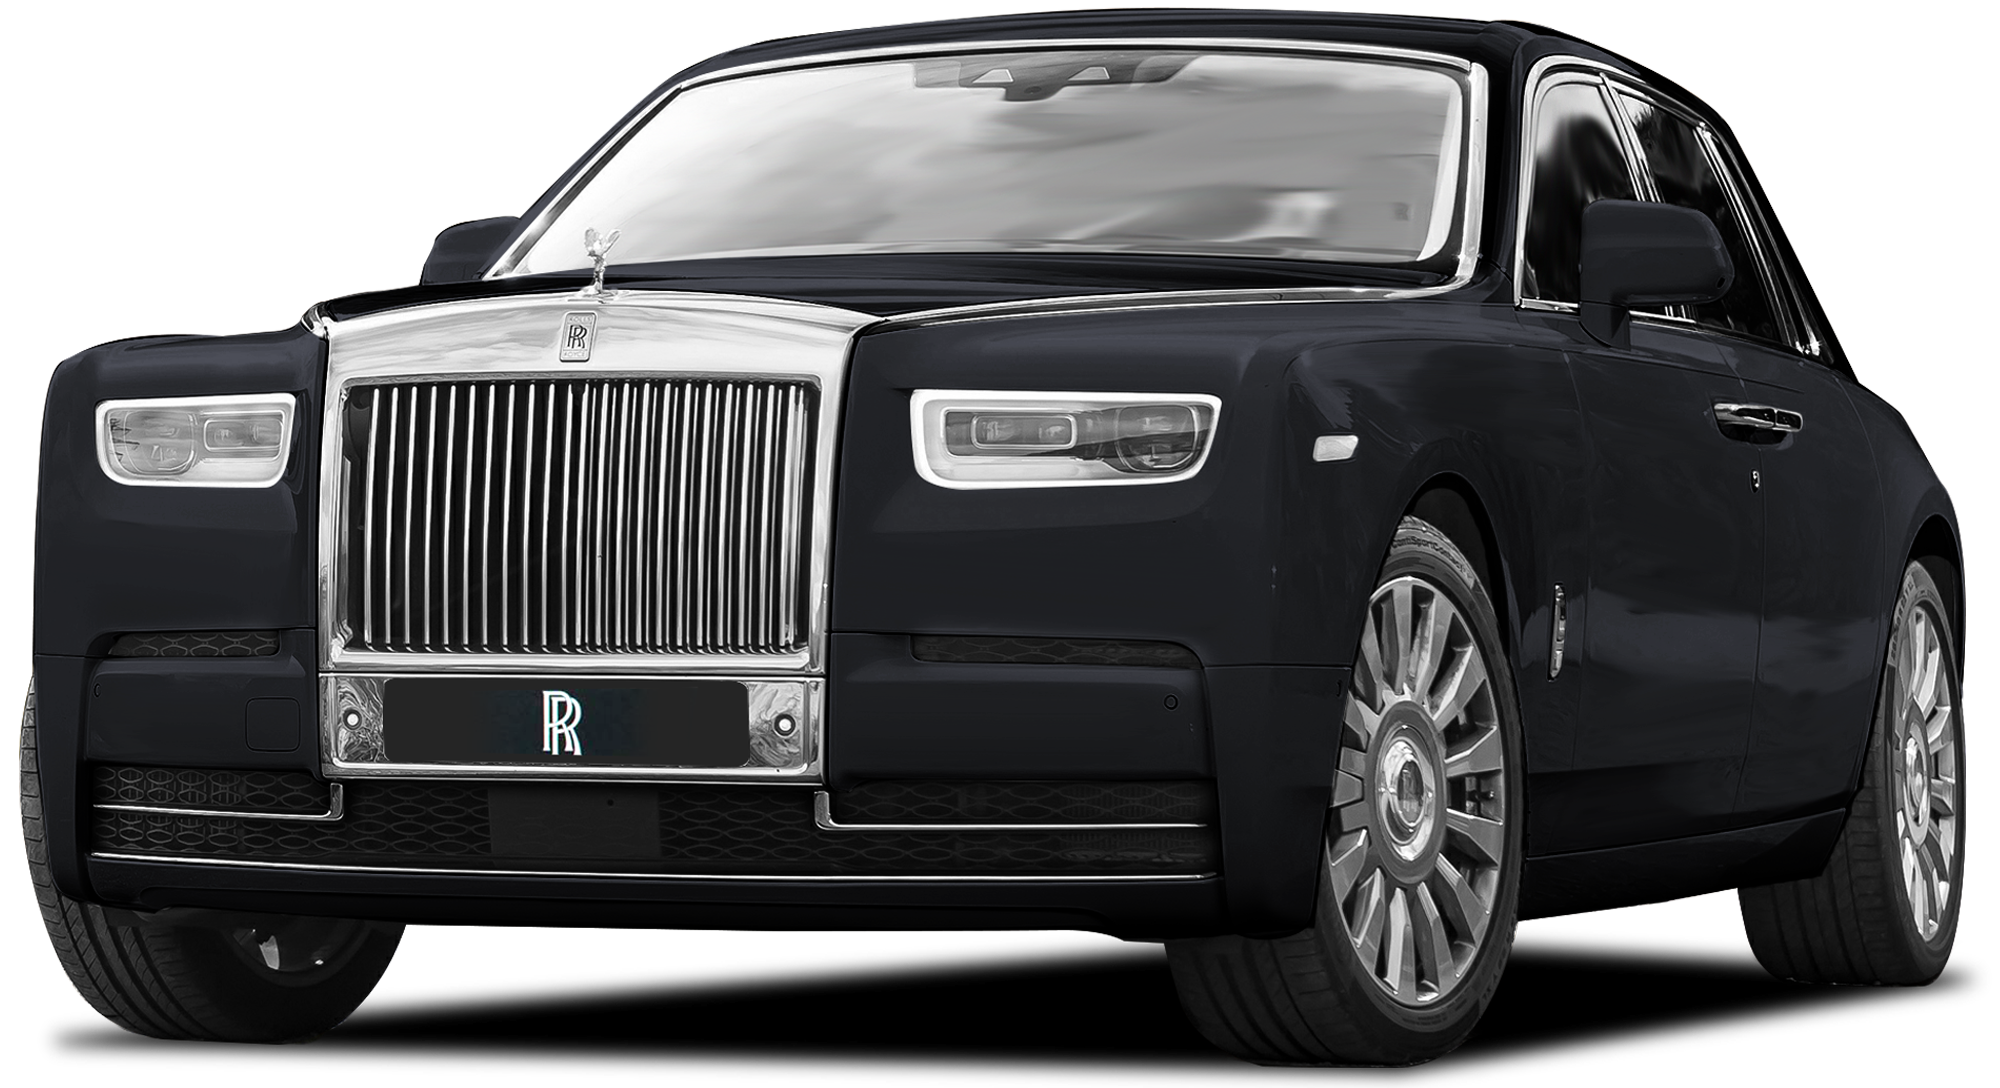 2020 Rolls-Royce Phantom Incentives, Specials & Offers in